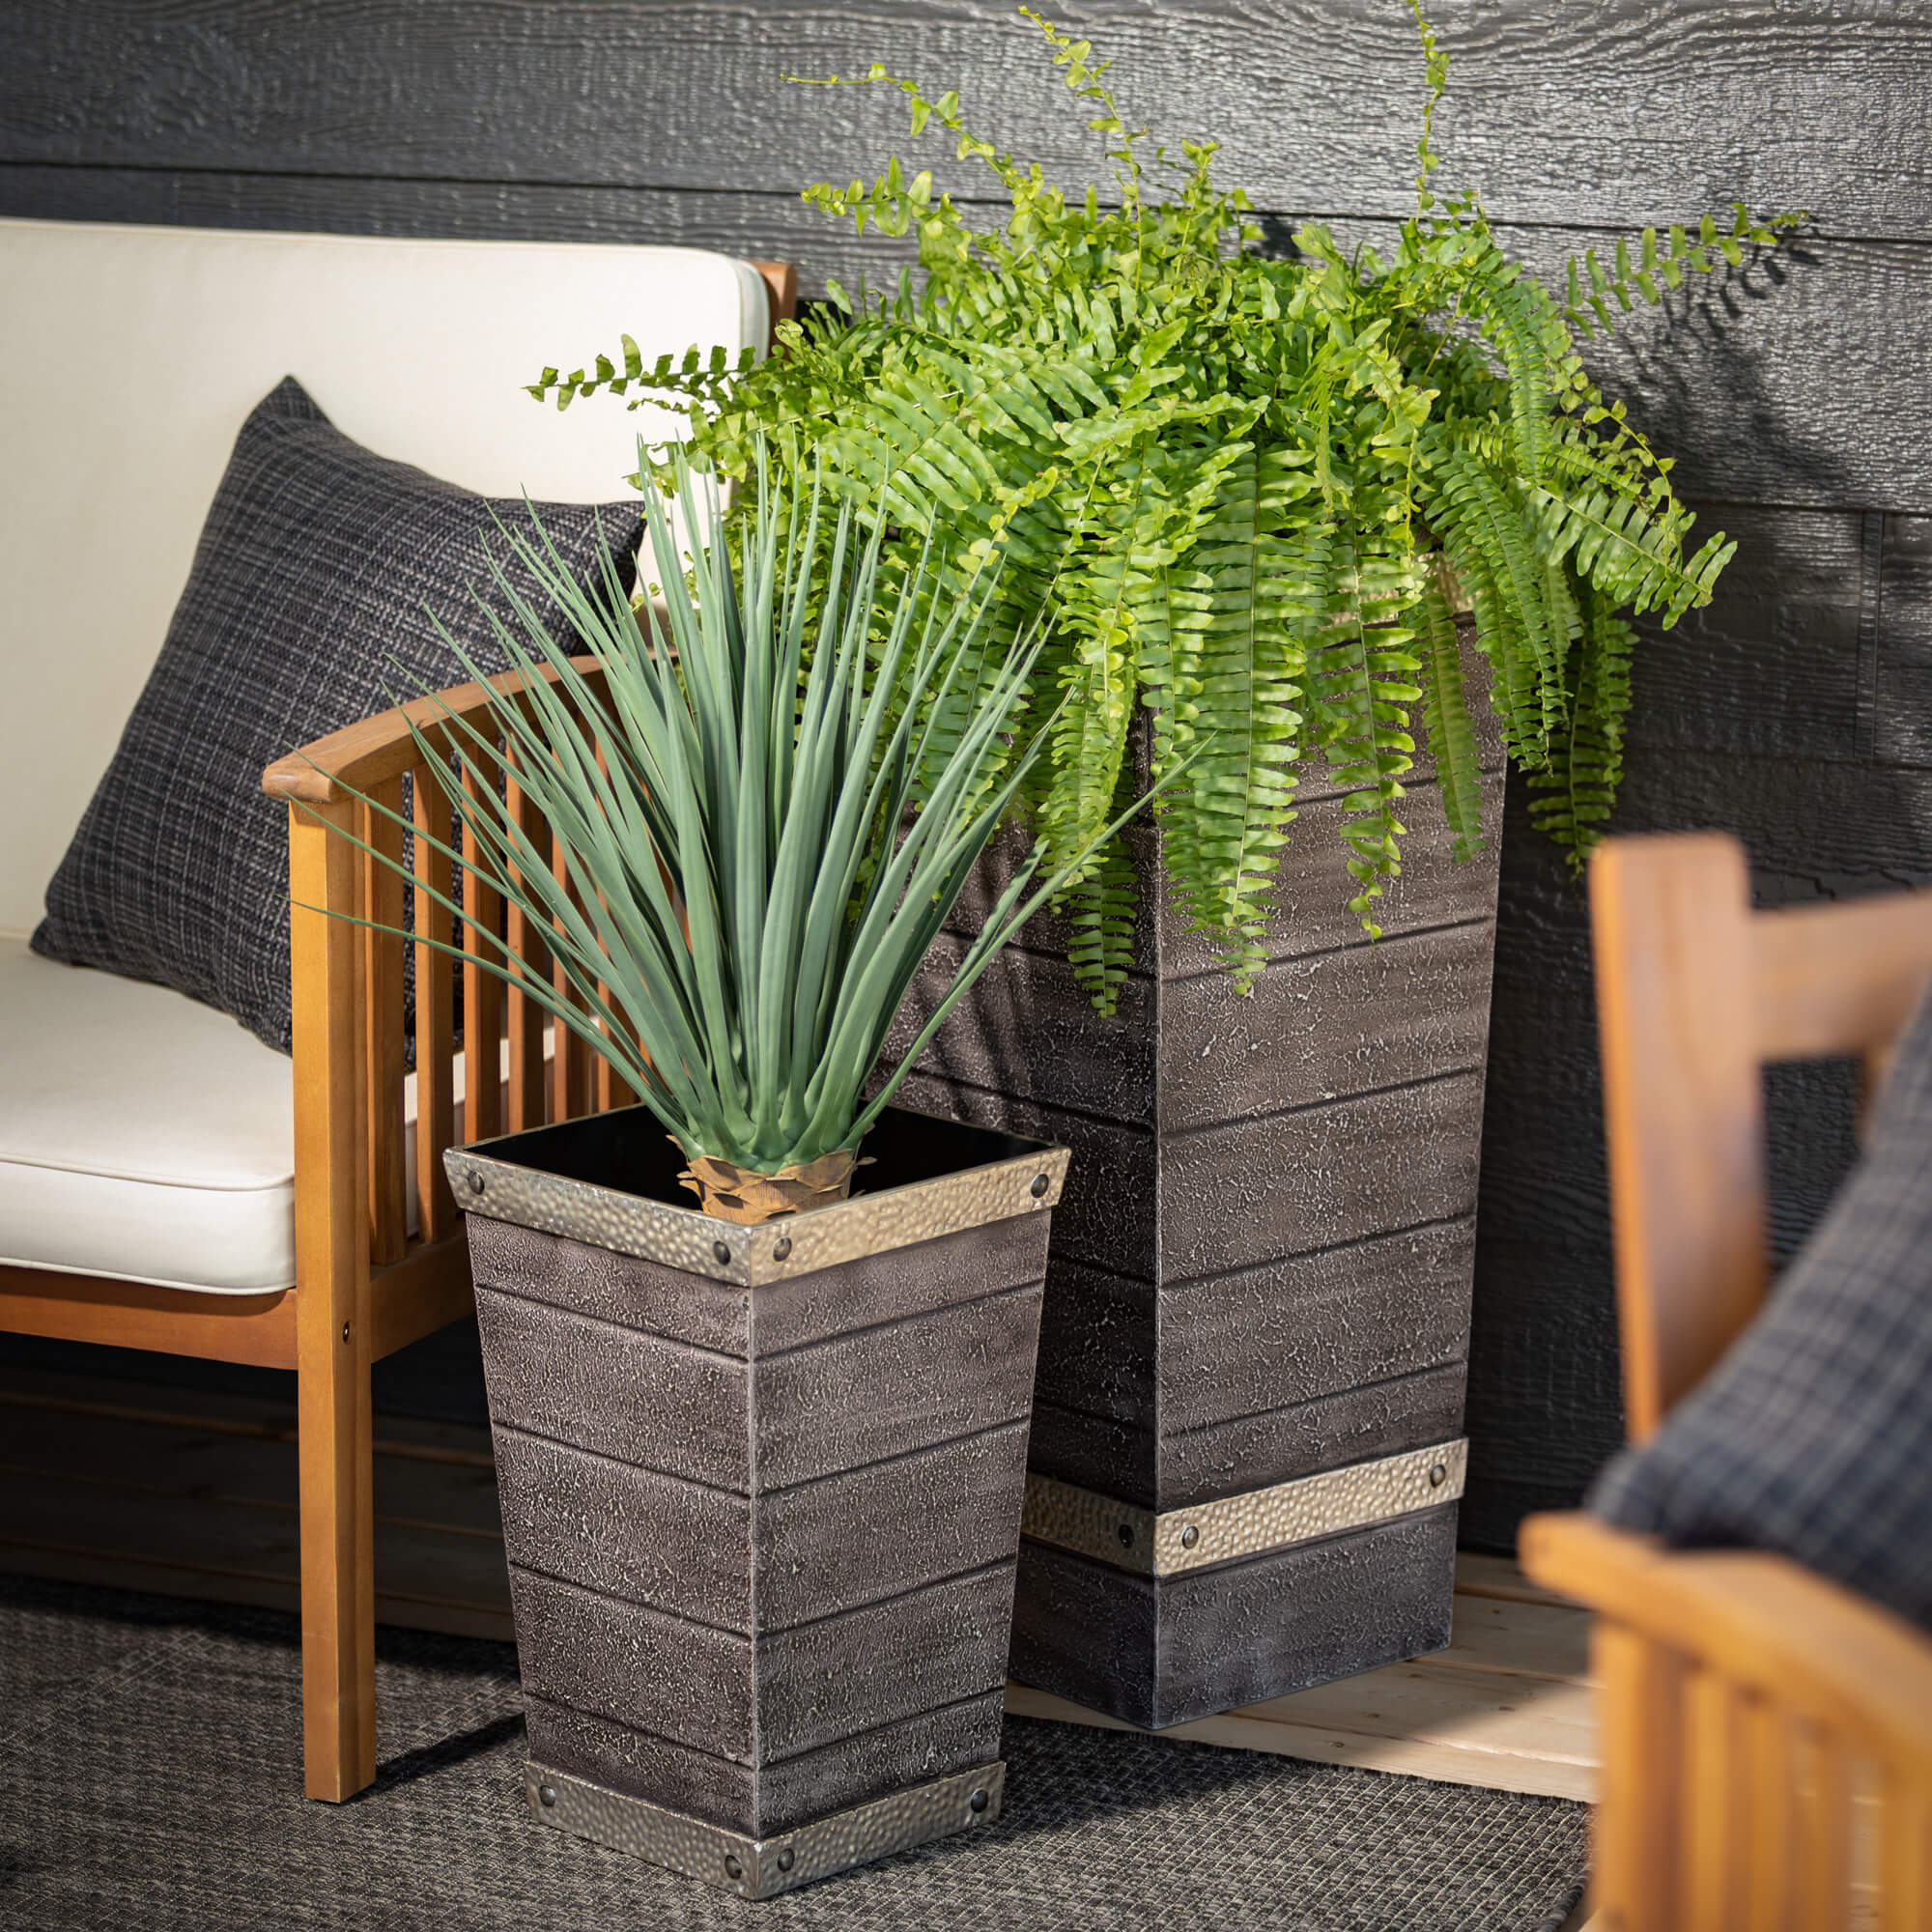 Trimmed Tapered Metal Planter Trio Elevate Home Decor - Outdoors